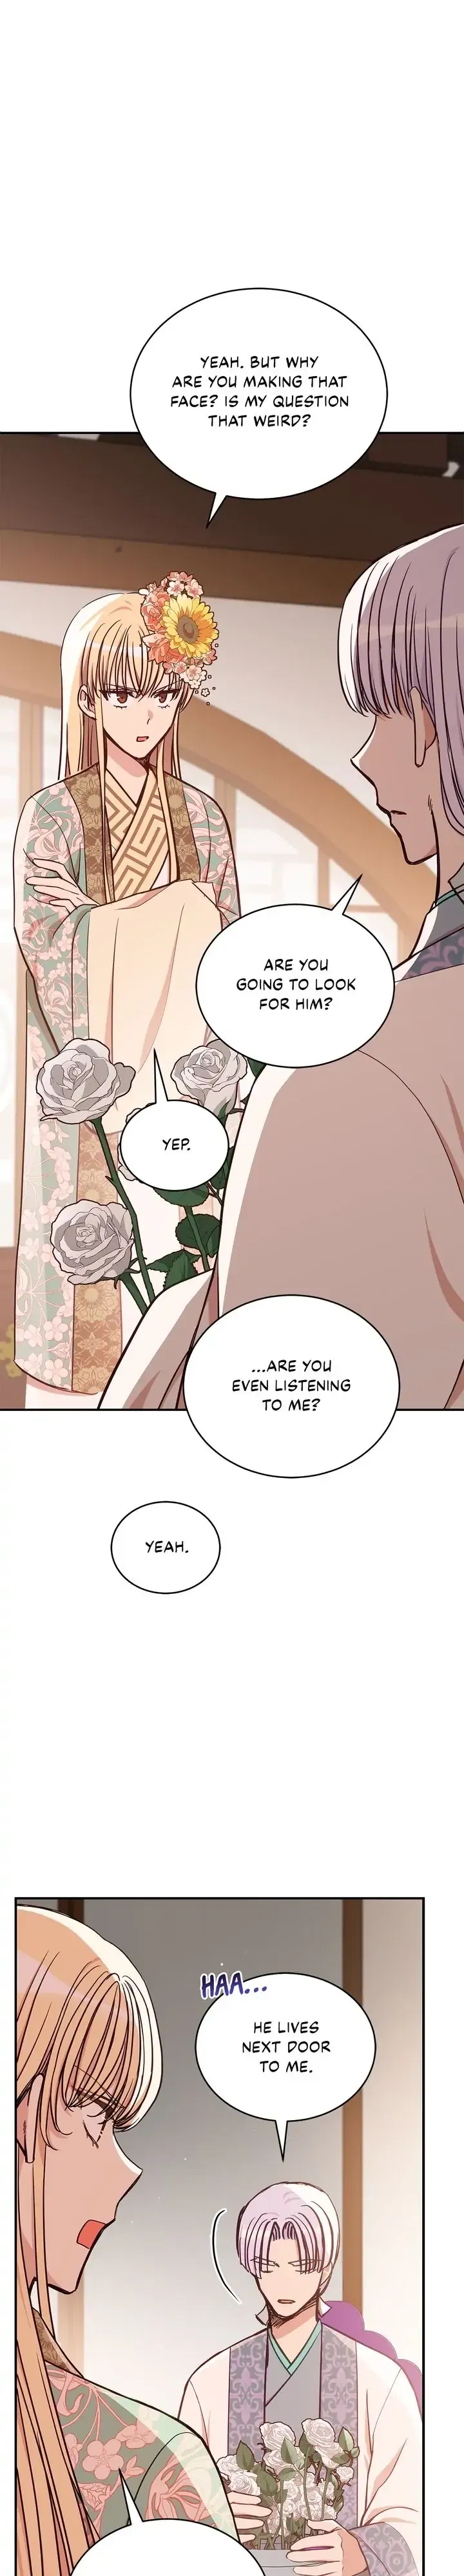 Contract Concubine Chapter 129 page 10